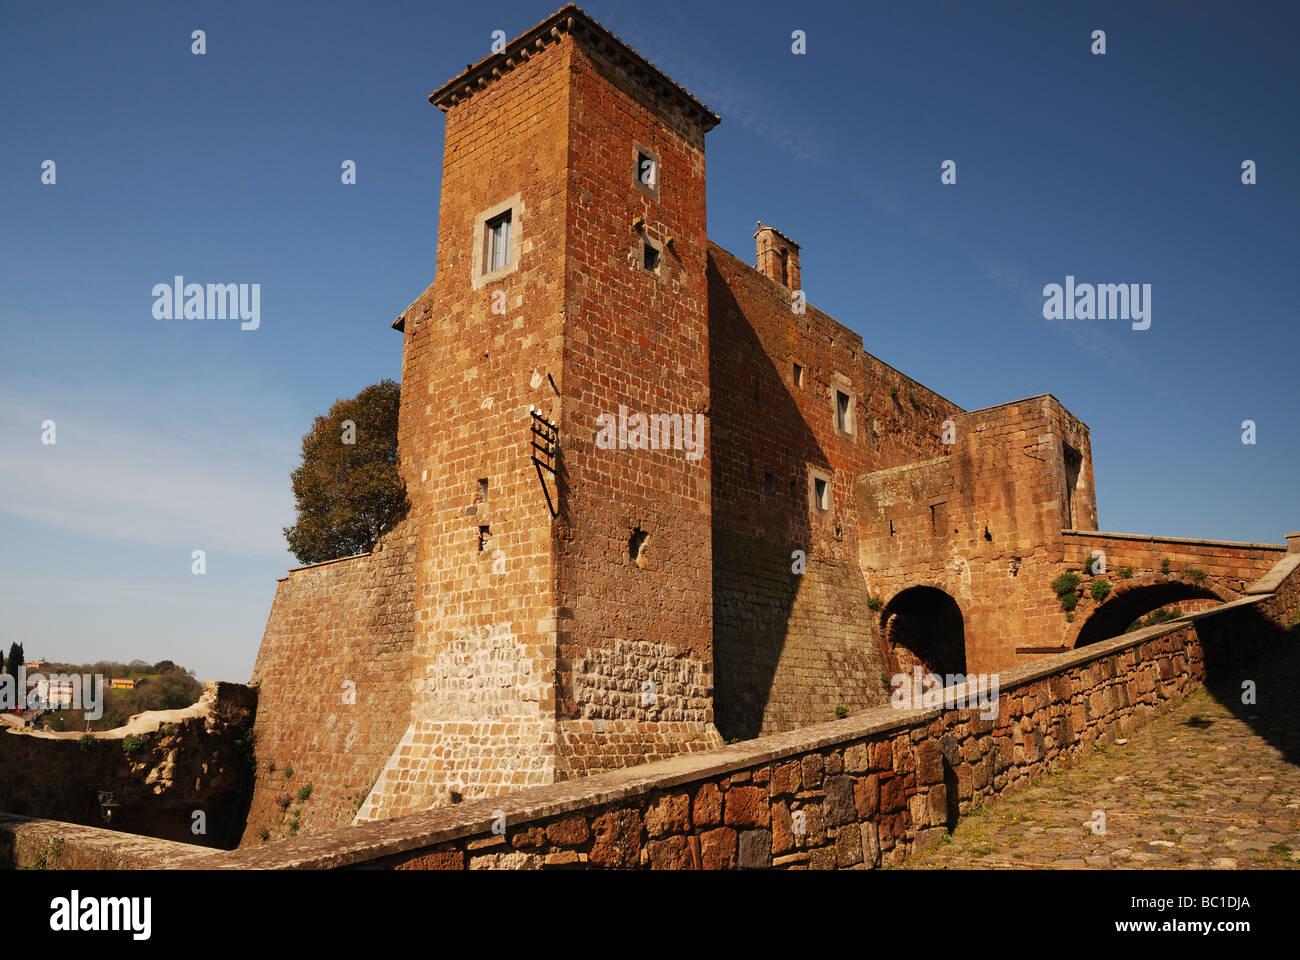 Celleno castle, Lazio county, Italy, Europe. The old 11th century castle was built in tuff blocks and was  probably built on a pre-existing settlement Stock Photo